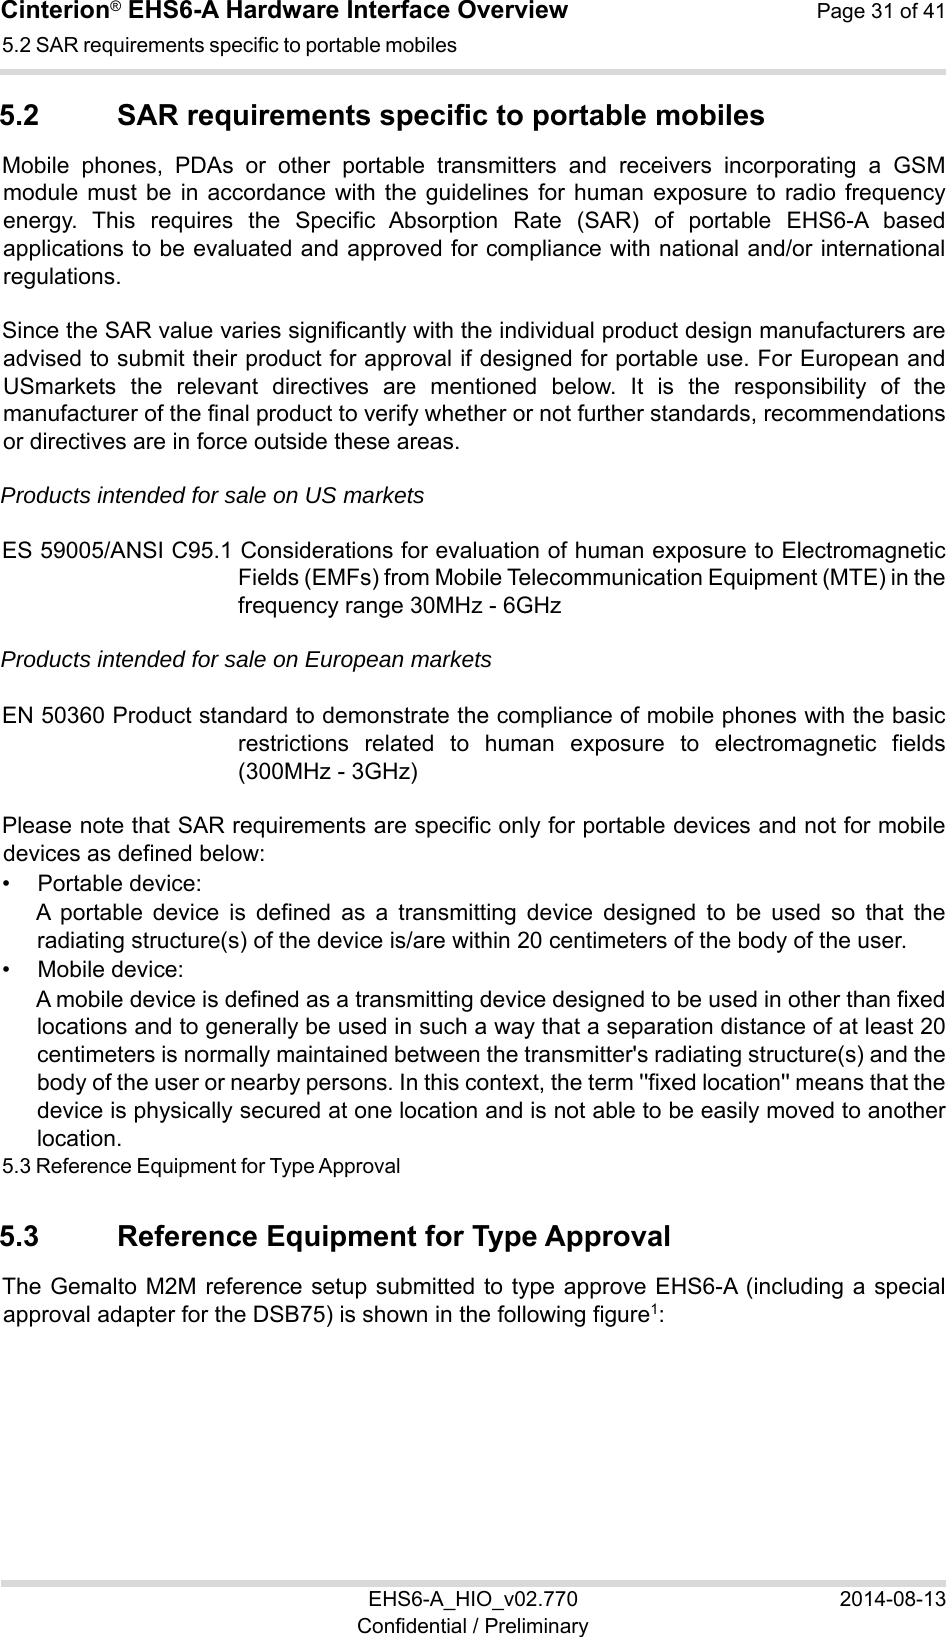 Cinterion® EHS6-A Hardware Interface Overview  Page 31 of 41 EHS6-A_HIO_v02.770  2014-08-13 Confidential / Preliminary 5.2 SAR requirements specific to portable mobiles 32 5.2  SAR requirements specific to portable mobiles Mobile  phones,  PDAs  or  other  portable  transmitters  and  receivers  incorporating  a  GSM module  must  be  in  accordance with  the  guidelines  for  human  exposure  to  radio  frequency energy.  This  requires  the  Specific  Absorption  Rate  (SAR)  of  portable  EHS6-A  based applications to be evaluated and approved for compliance with national and/or international regulations.  Since the SAR value varies significantly with the individual product design manufacturers are advised to submit their product for approval if designed for portable use. For European and USmarkets  the  relevant  directives  are  mentioned  below.  It  is  the  responsibility  of  the manufacturer of the final product to verify whether or not further standards, recommendations or directives are in force outside these areas.  Products intended for sale on US markets ES 59005/ANSI C95.1 Considerations for evaluation of human exposure to Electromagnetic Fields (EMFs) from Mobile Telecommunication Equipment (MTE) in the frequency range 30MHz - 6GHz  Products intended for sale on European markets EN 50360 Product standard to demonstrate the compliance of mobile phones with the basic restrictions  related  to  human  exposure  to  electromagnetic  fields (300MHz - 3GHz) Please note that SAR requirements are specific only for portable devices and not for mobile devices as defined below: •  Portable device: A  portable  device  is  defined  as  a  transmitting  device  designed  to  be  used  so  that  the radiating structure(s) of the device is/are within 20 centimeters of the body of the user. •  Mobile device: A mobile device is defined as a transmitting device designed to be used in other than fixed locations and to generally be used in such a way that a separation distance of at least 20 centimeters is normally maintained between the transmitter&apos;s radiating structure(s) and the body of the user or nearby persons. In this context, the term &apos;&apos;fixed location&apos;&apos; means that the device is physically secured at one location and is not able to be easily moved to another location. 5.3 Reference Equipment for Type Approval 32 5.3  Reference Equipment for Type Approval The Gemalto M2M  reference  setup  submitted  to  type  approve  EHS6-A (including a special approval adapter for the DSB75) is shown in the following figure1: 